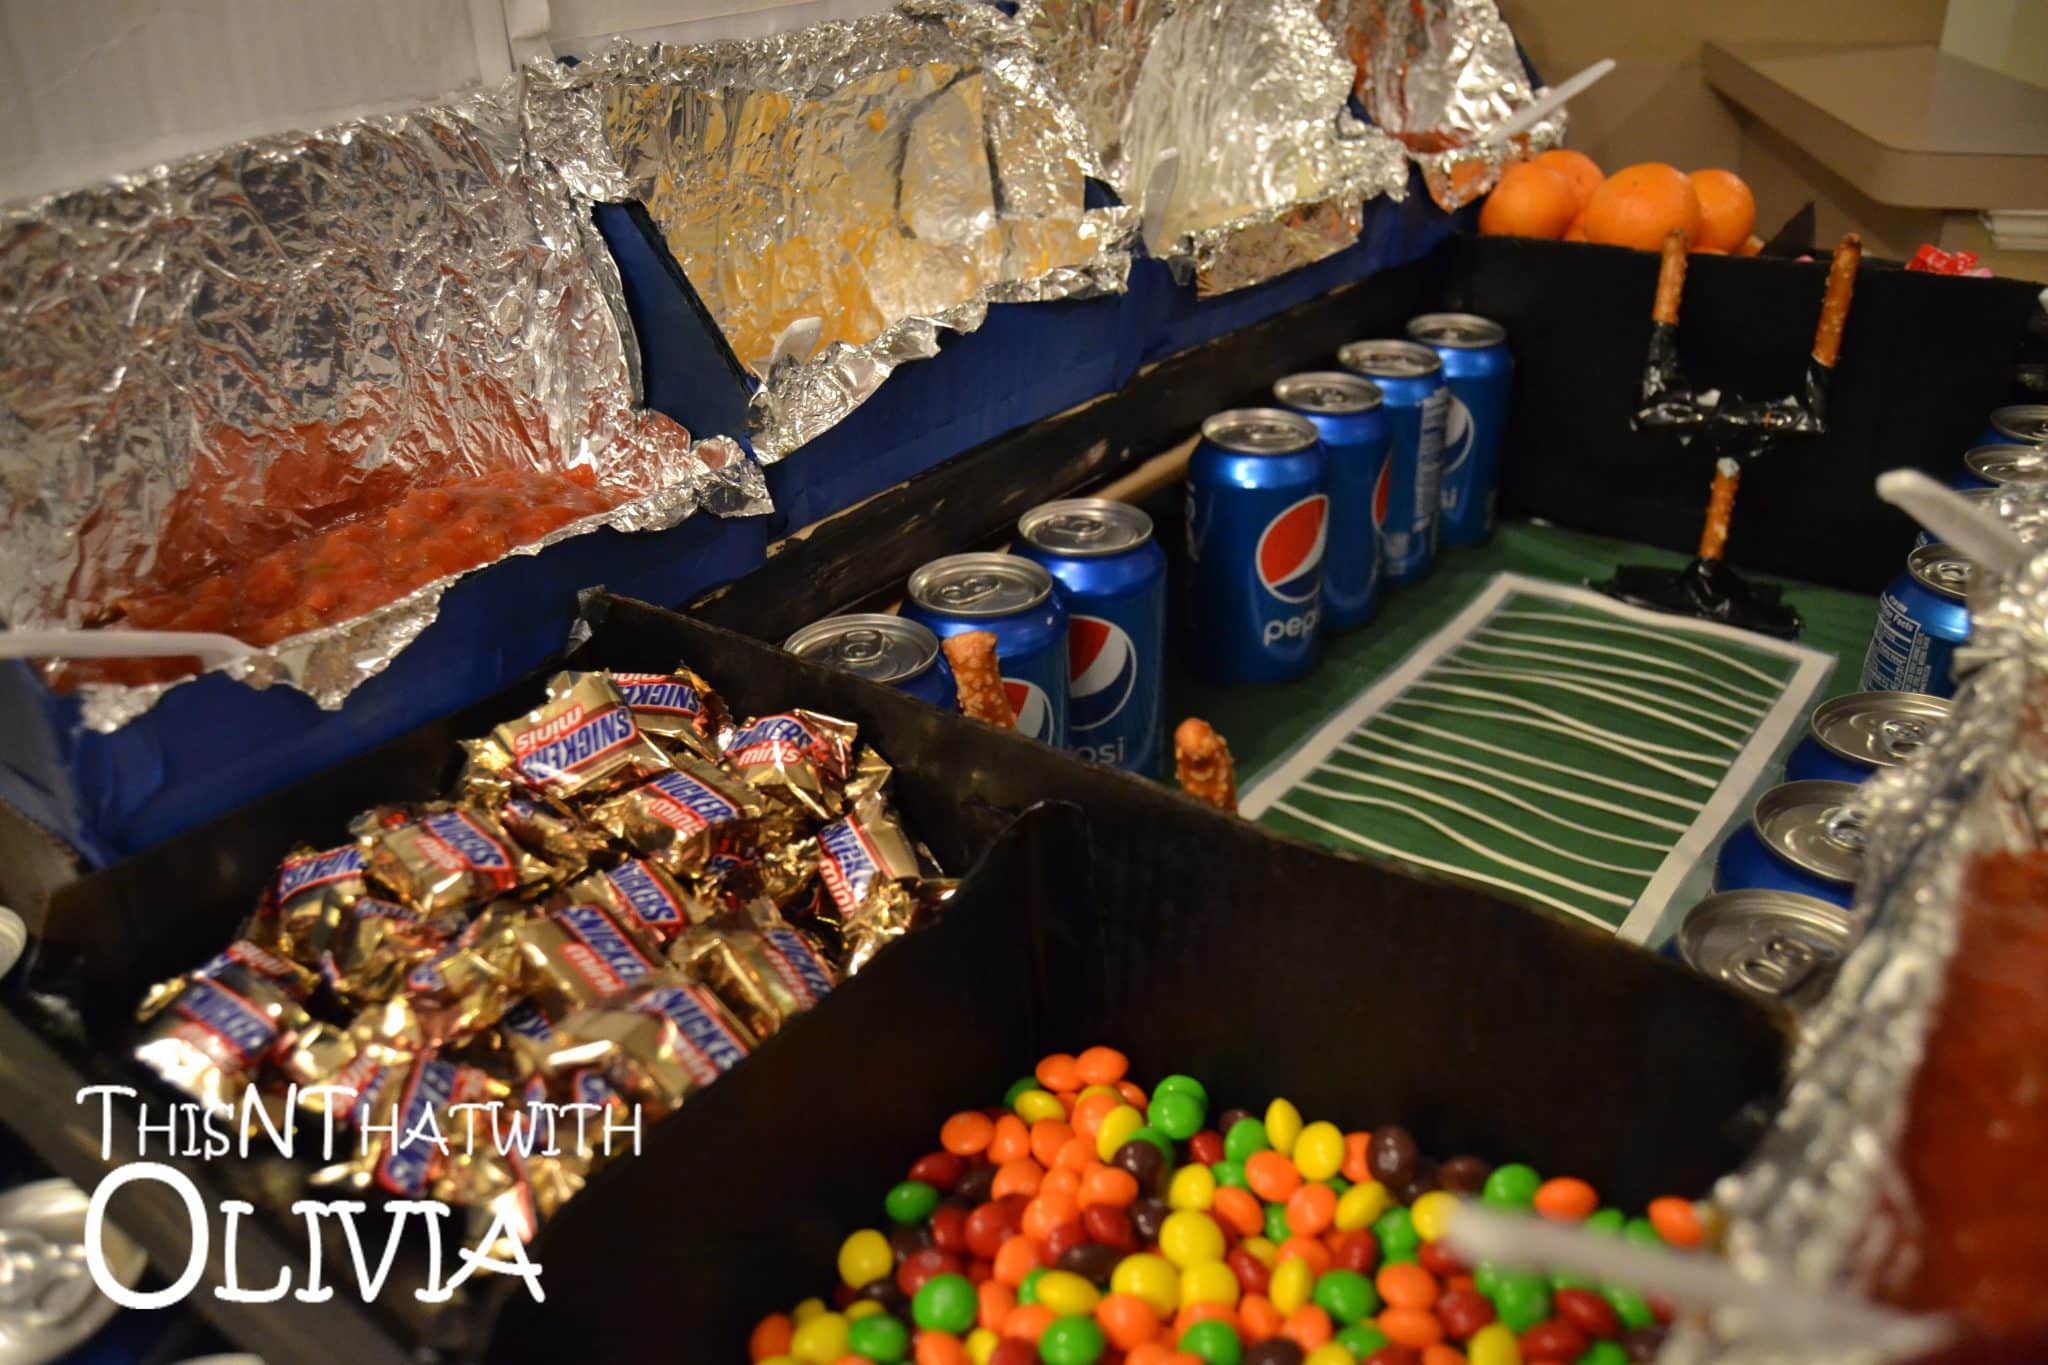 How to Build the Ultimate Snack Stadium #GameDayGlory #ad